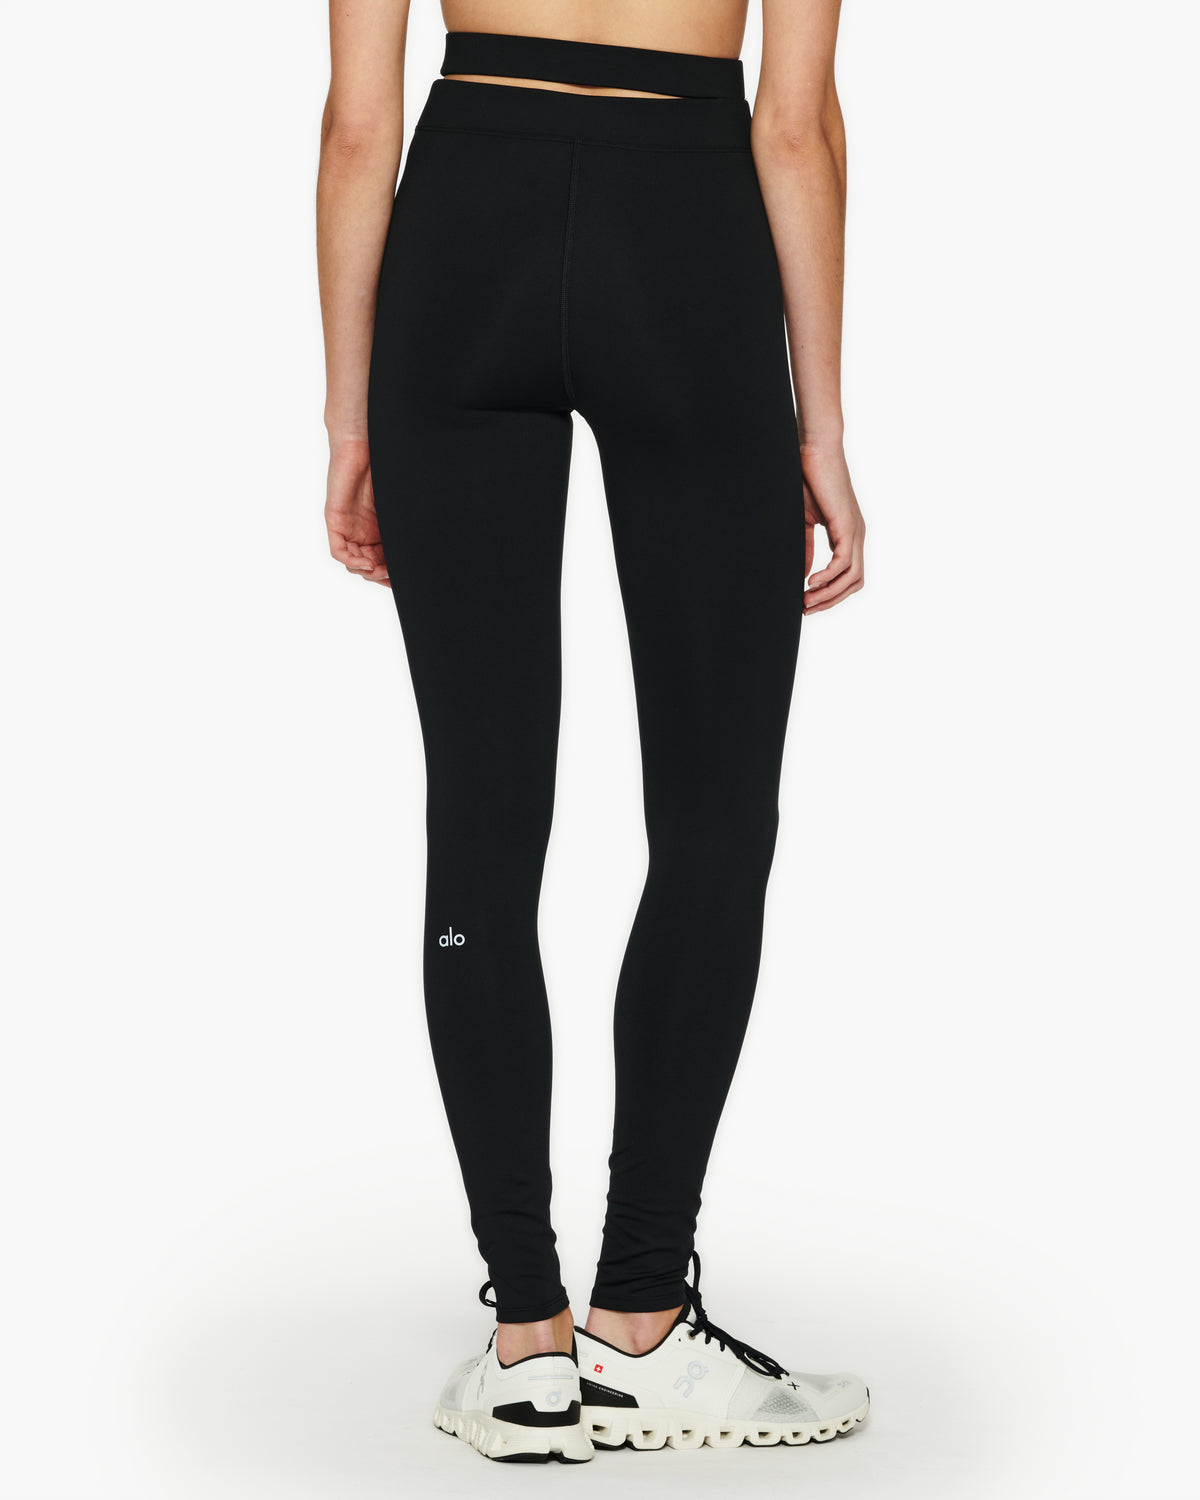 Airlift High-Waisted All Access Legging